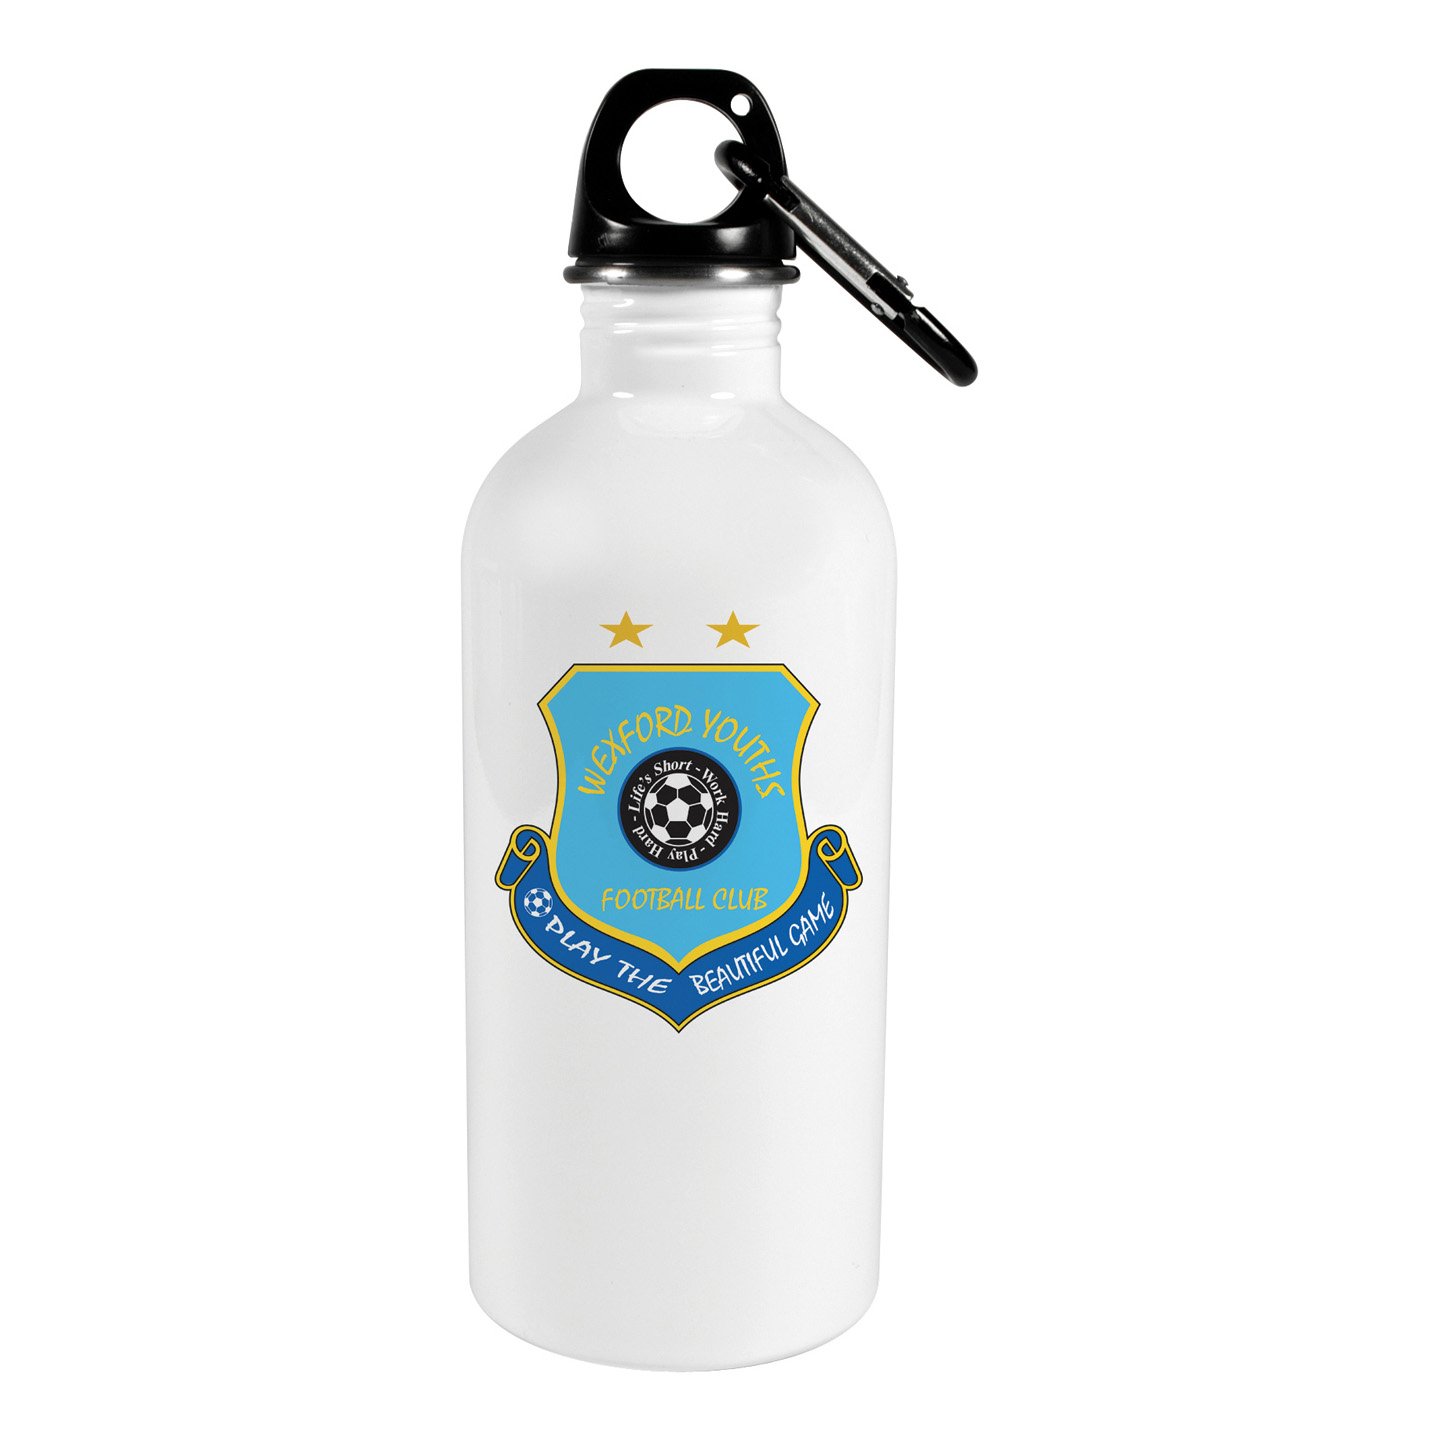 Sublimation Stainless Steel Water Bottle,sublimation White Water Bottle,  Sublimatable water bottles,Sublimation mugs, 11 oz sublimation mugs, 15 oz  sublimation mugs, rim handle sublimation mug, color sublimation mugs,  animal handle sublimation